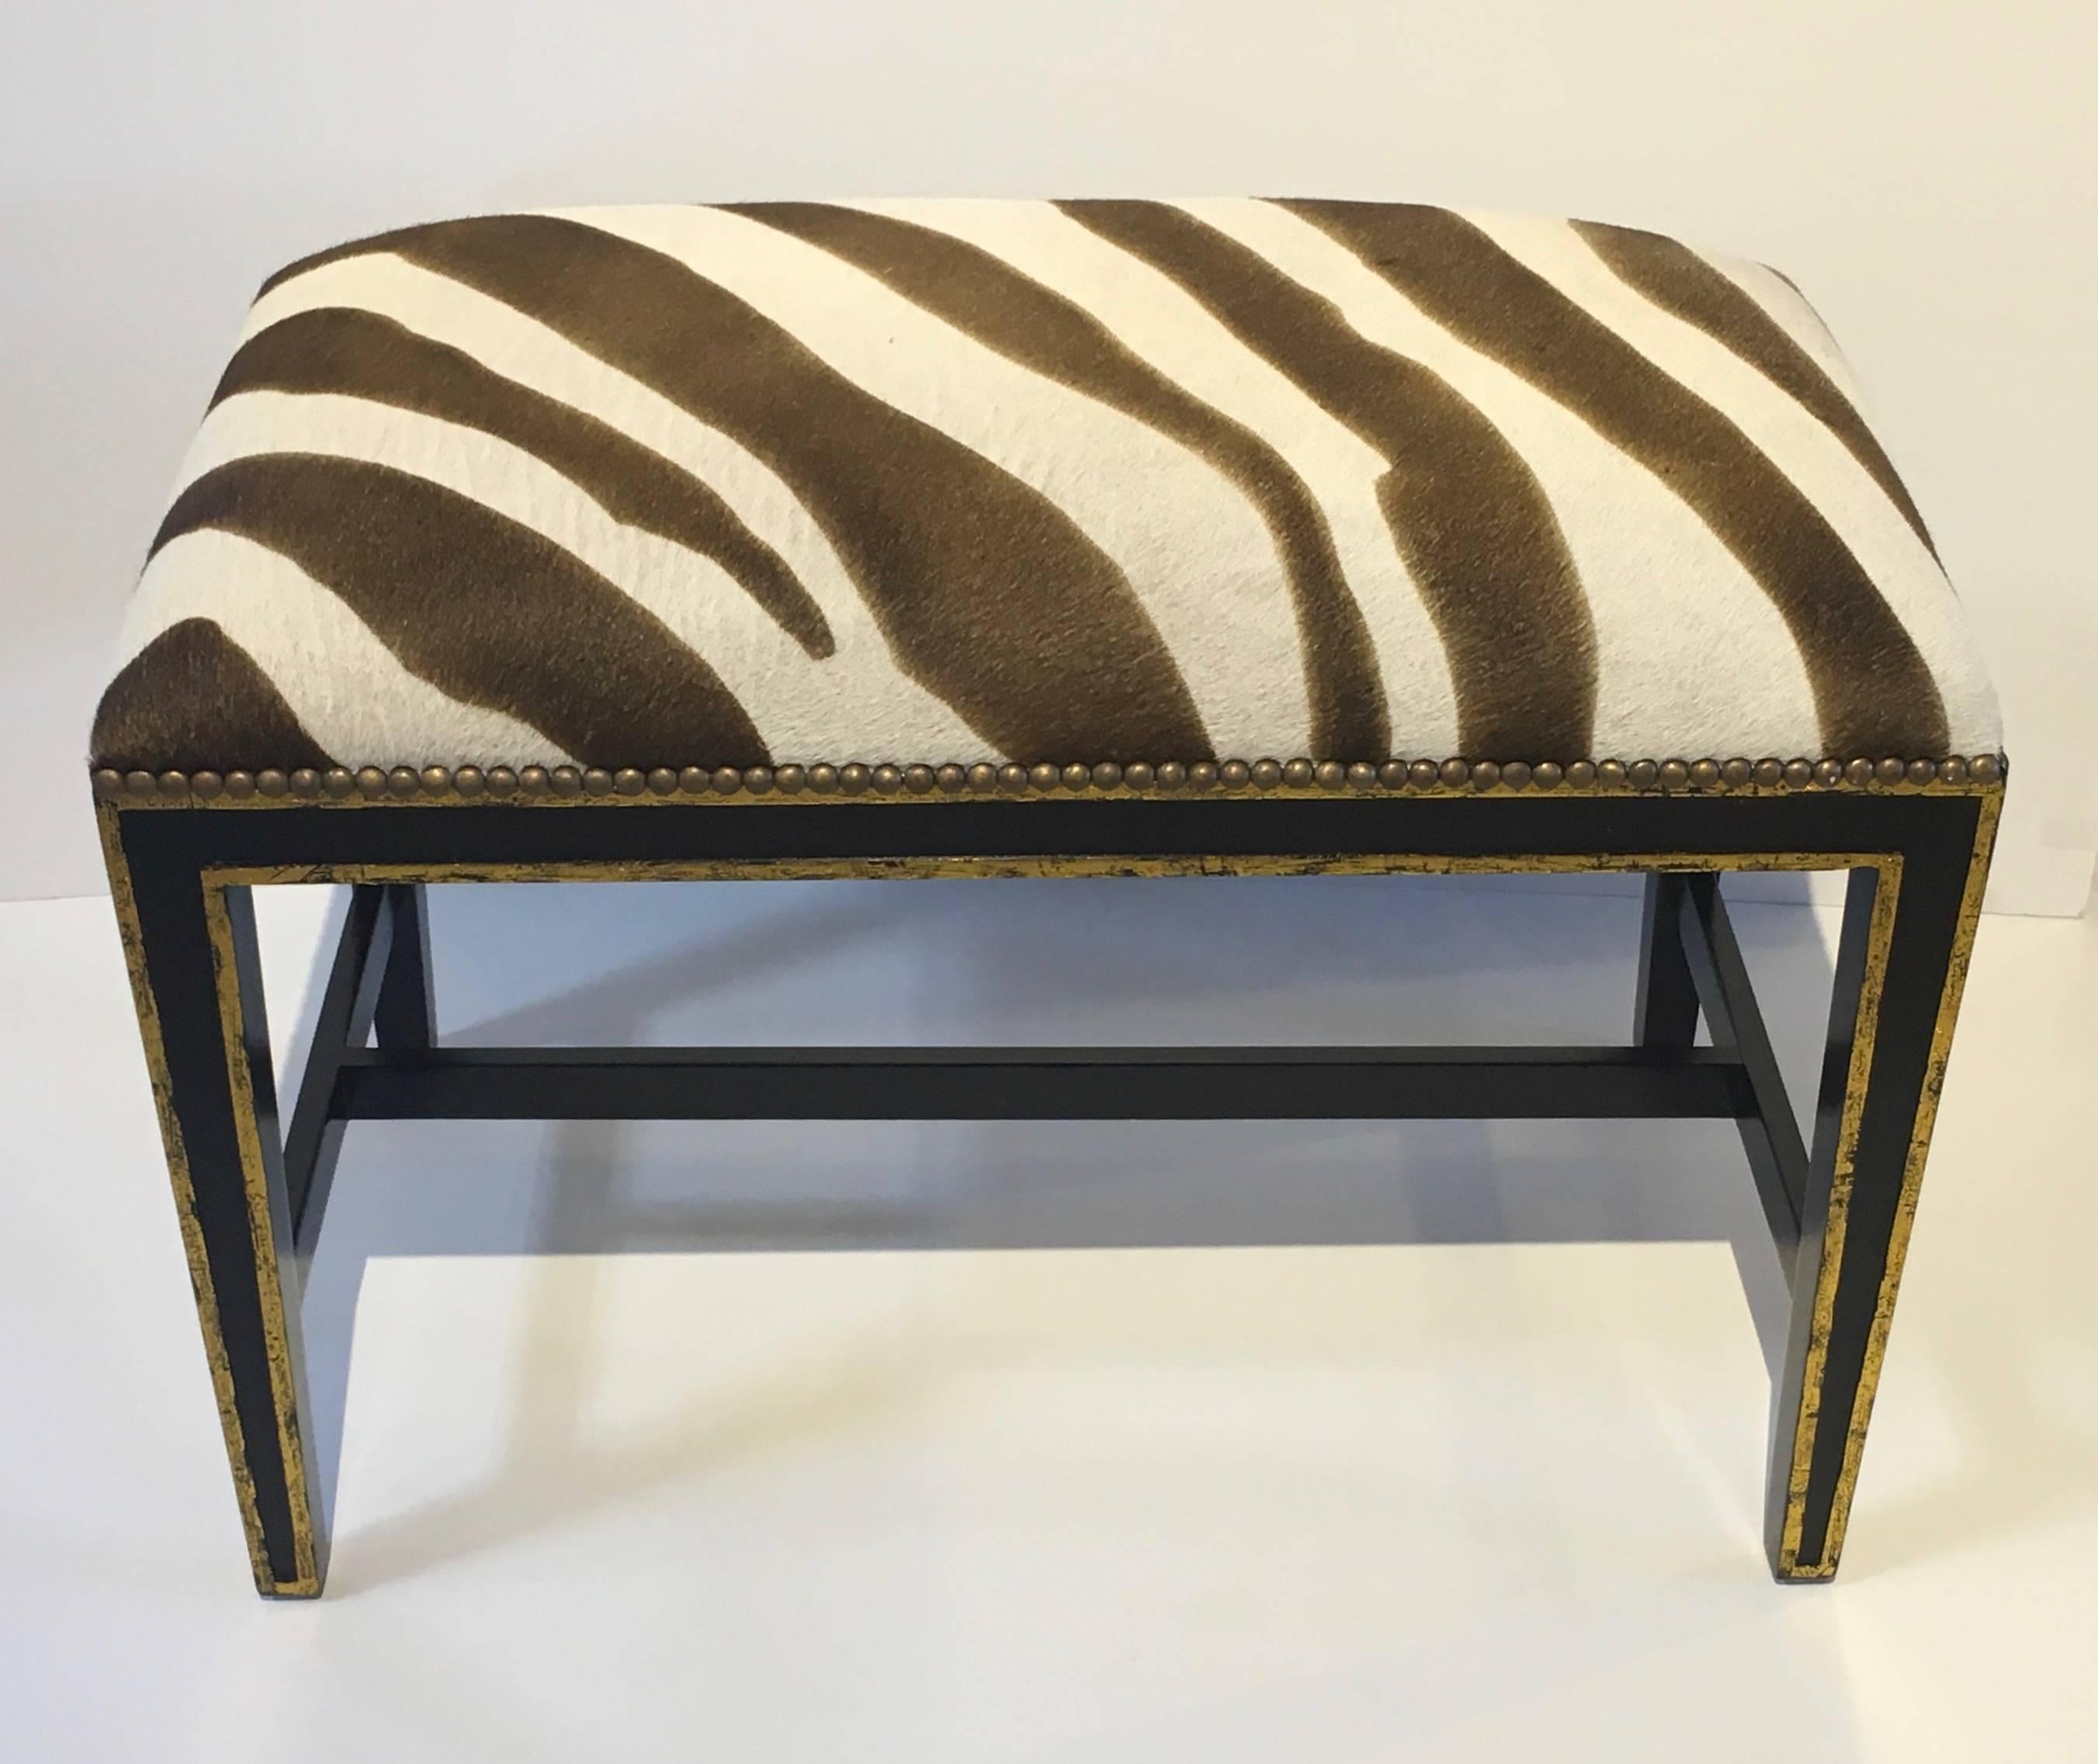 Zebra Printed Hide Pair of Ottomans or Benches, with Brass Nailhead Detailing 3